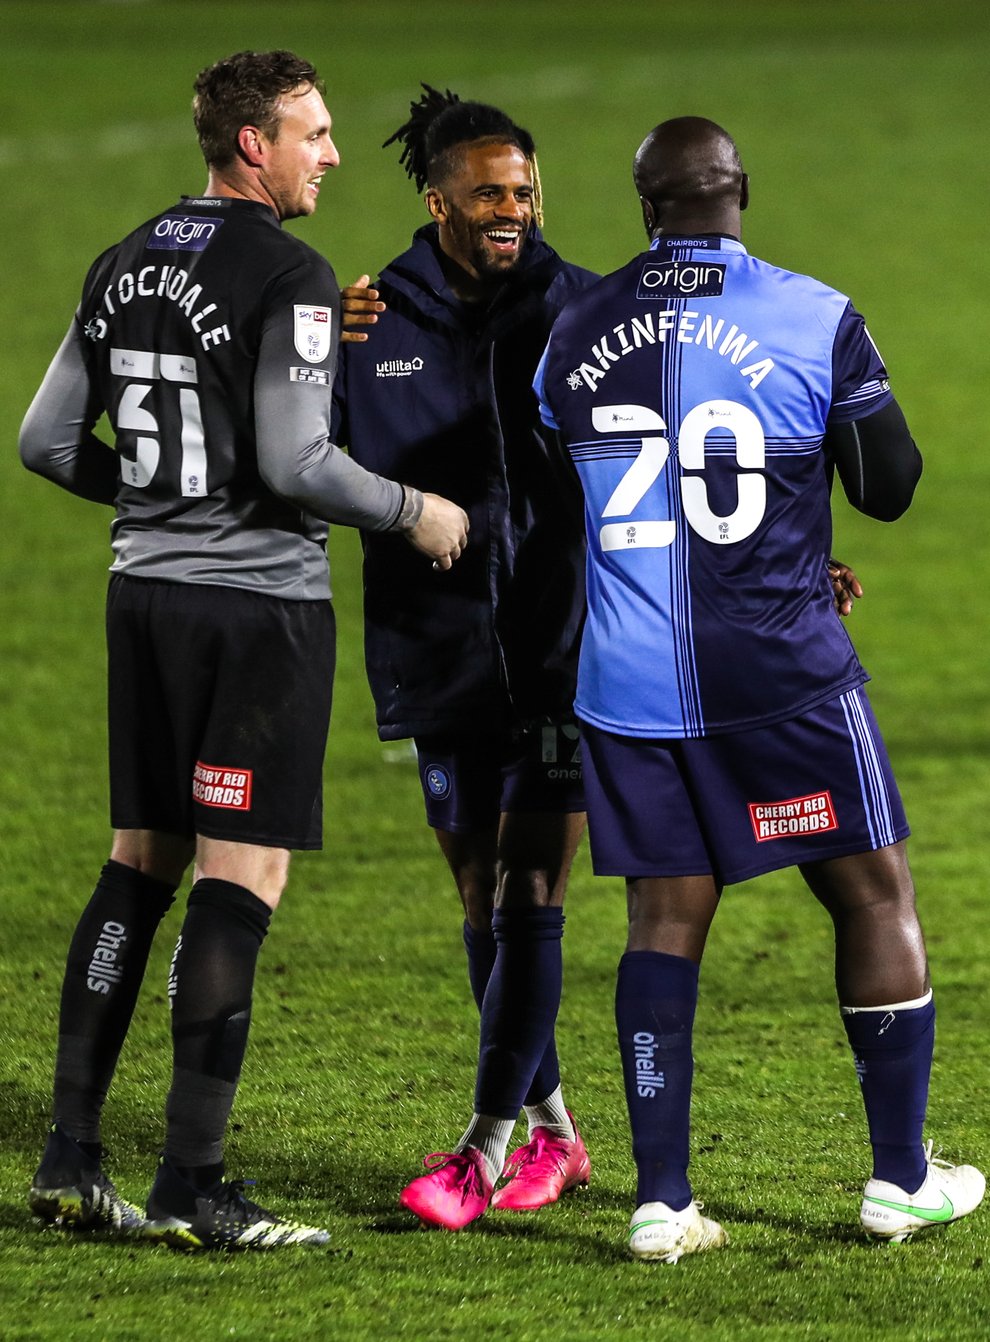 Garath McCleary, centre, was on target as Wycombe honoured Adebayo Akinfenwa, right (Kieran Cleeves/PA)